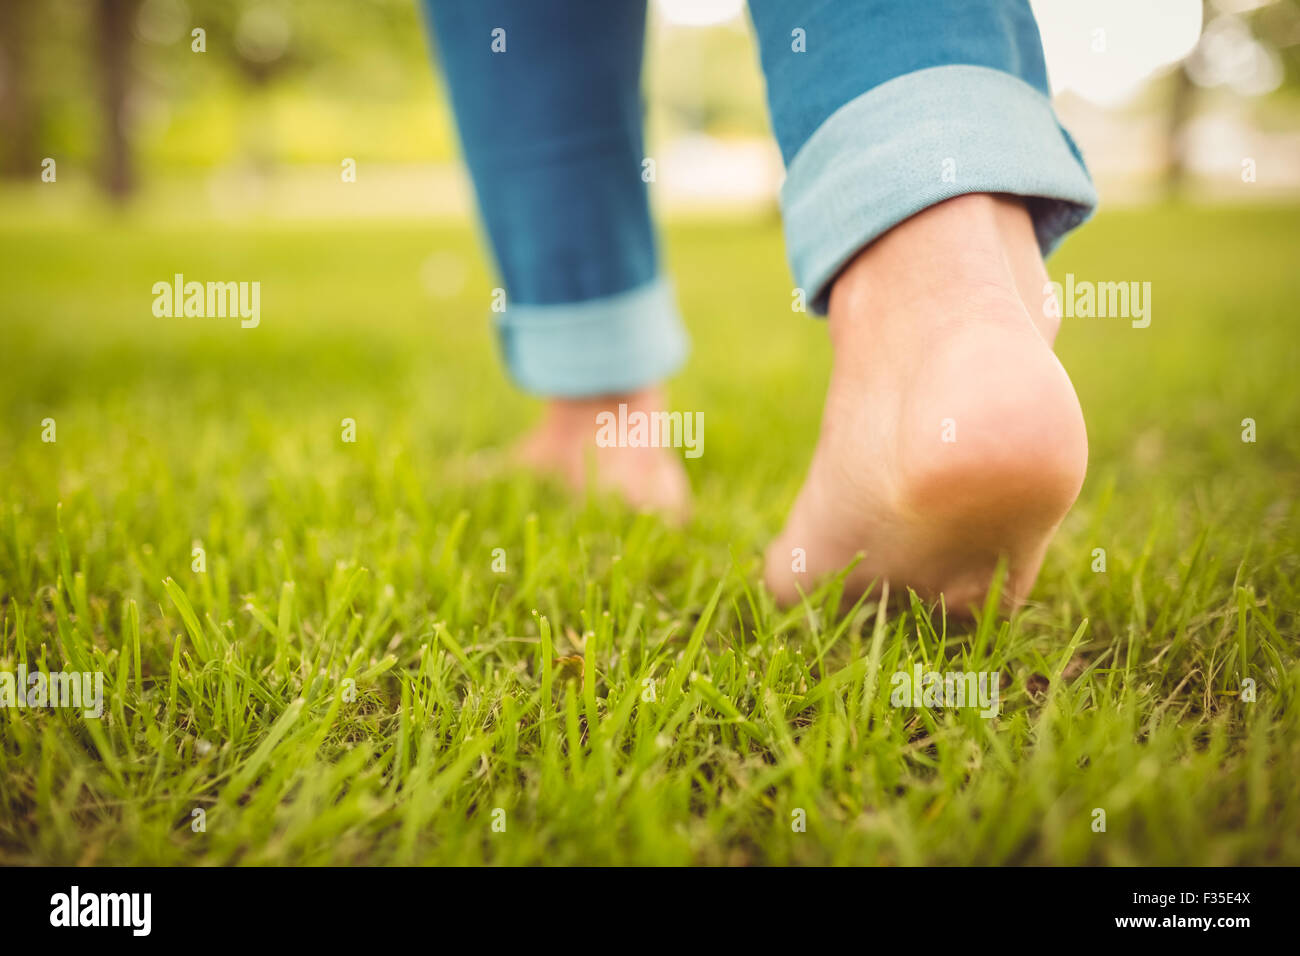 Low section of woman walking on grass Stock Photo